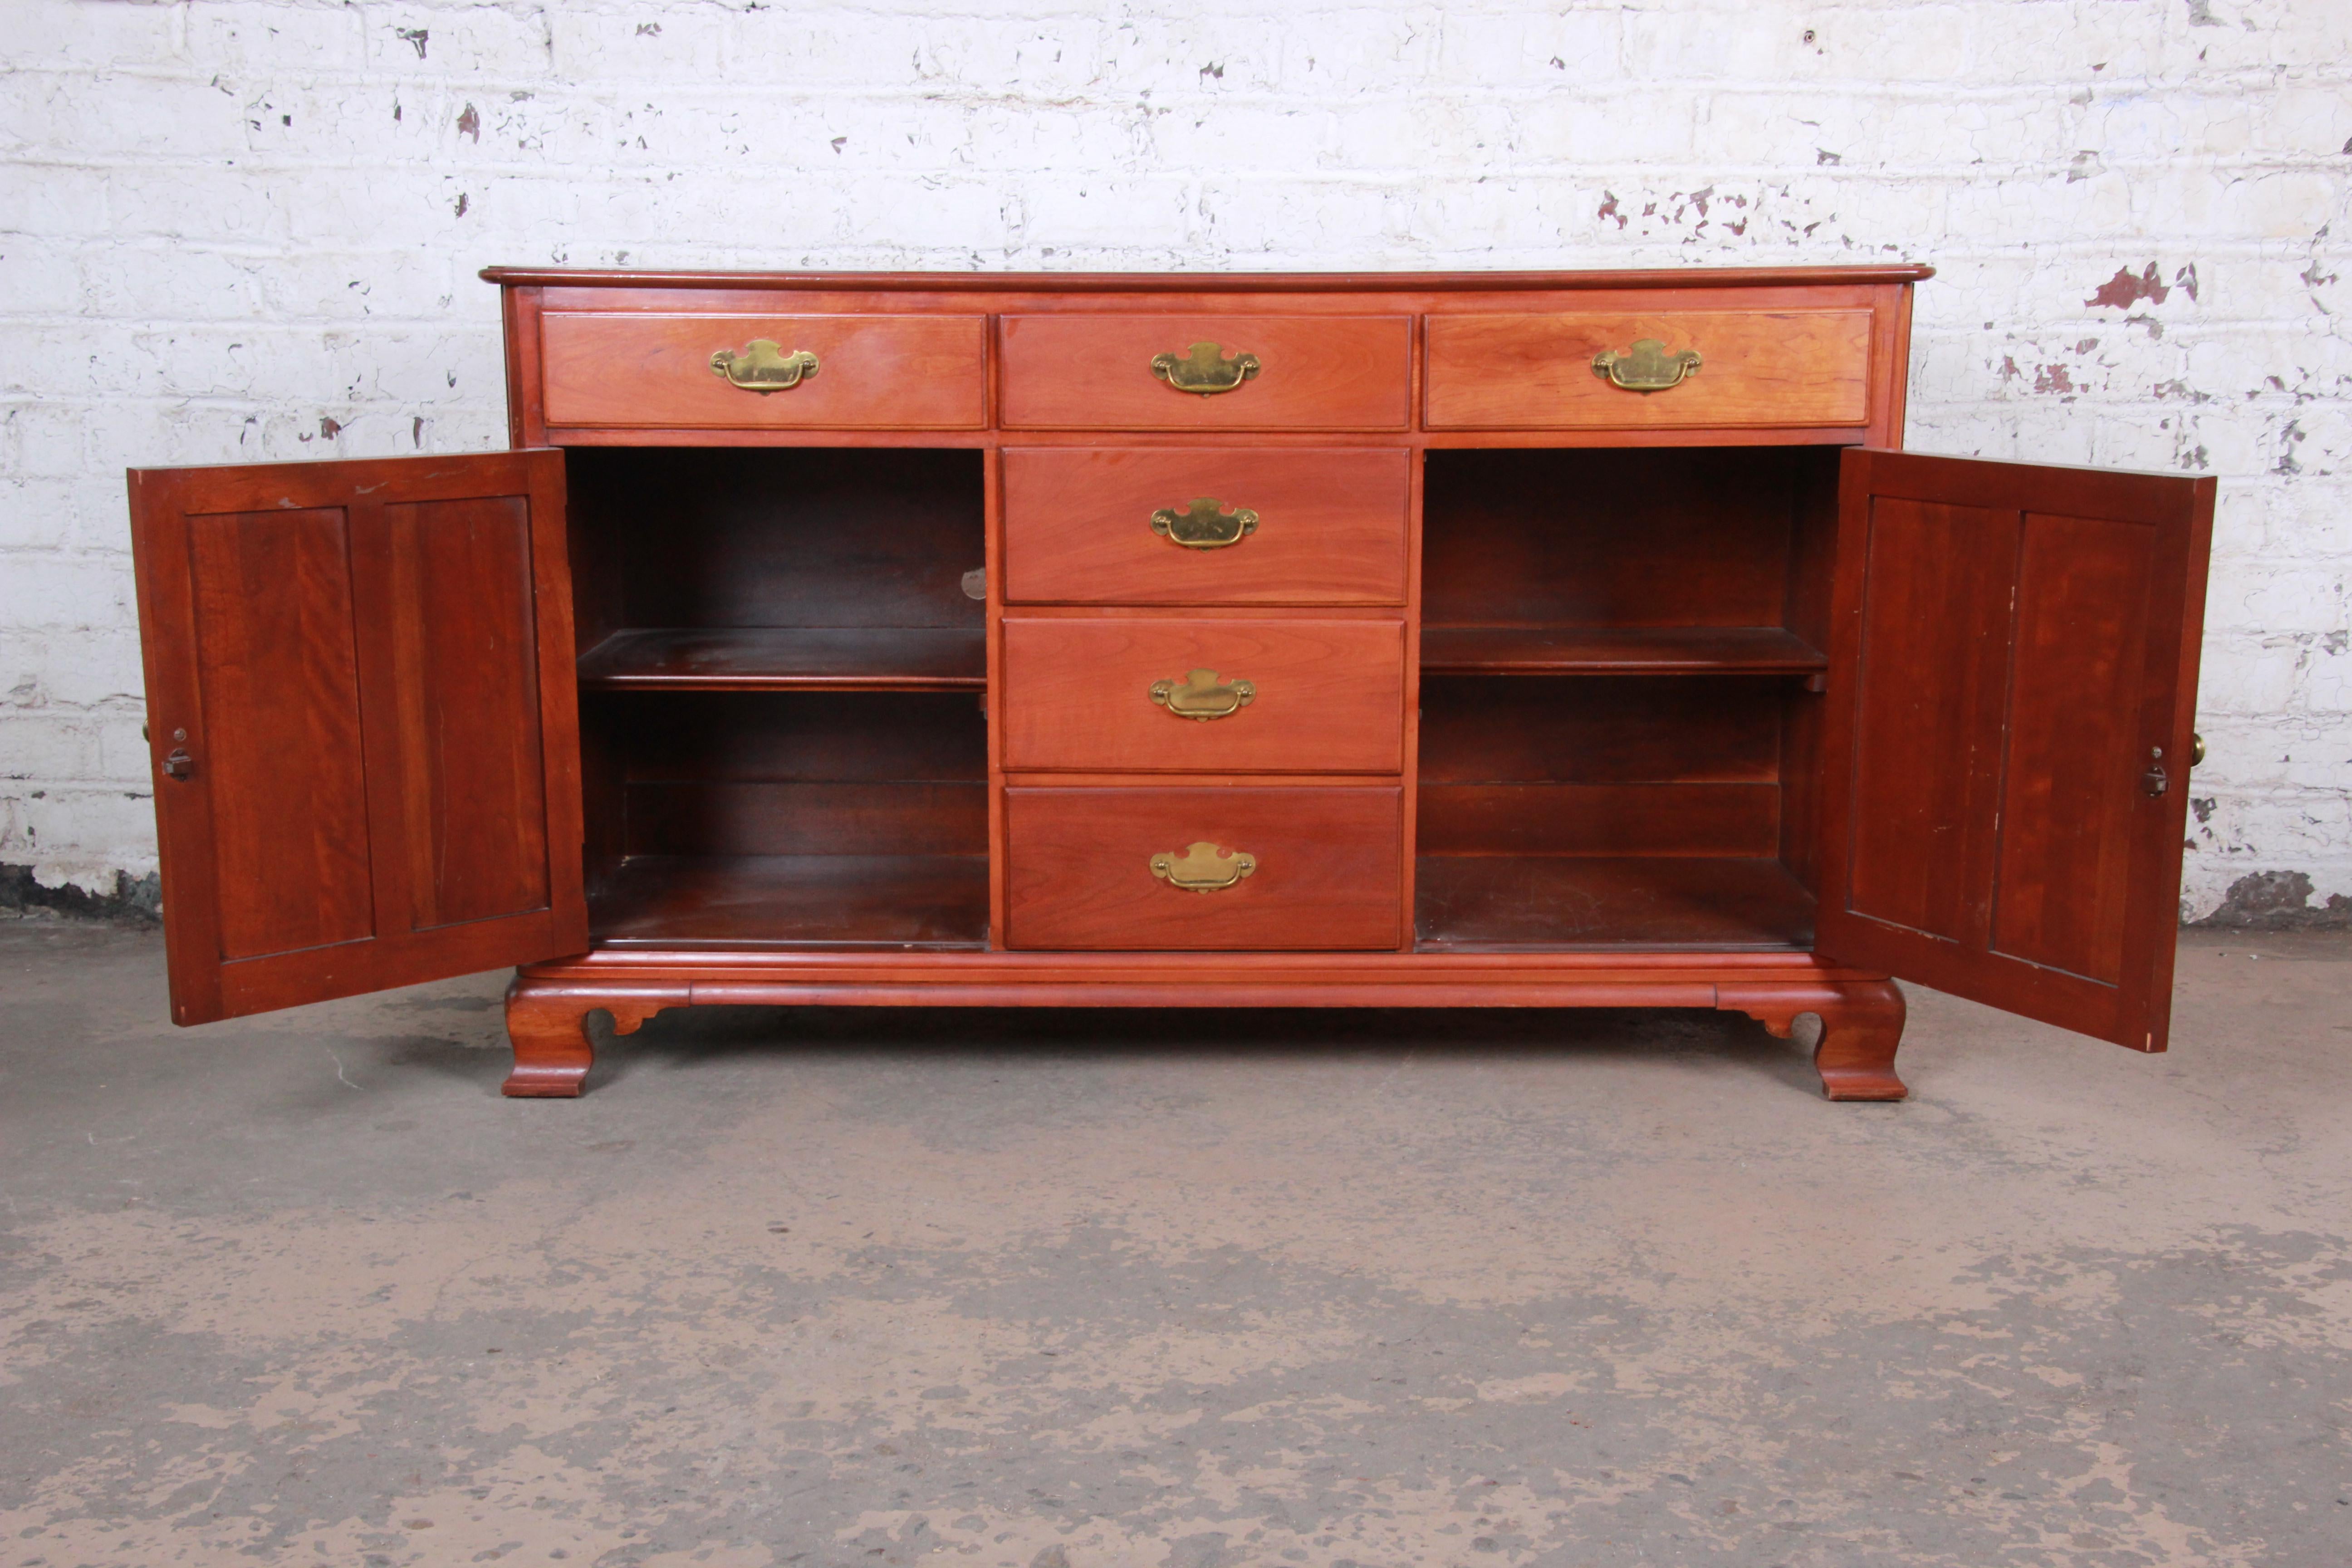 Mid-20th Century Midcentury Solid Cherrywood Sideboard Credenza by Willet